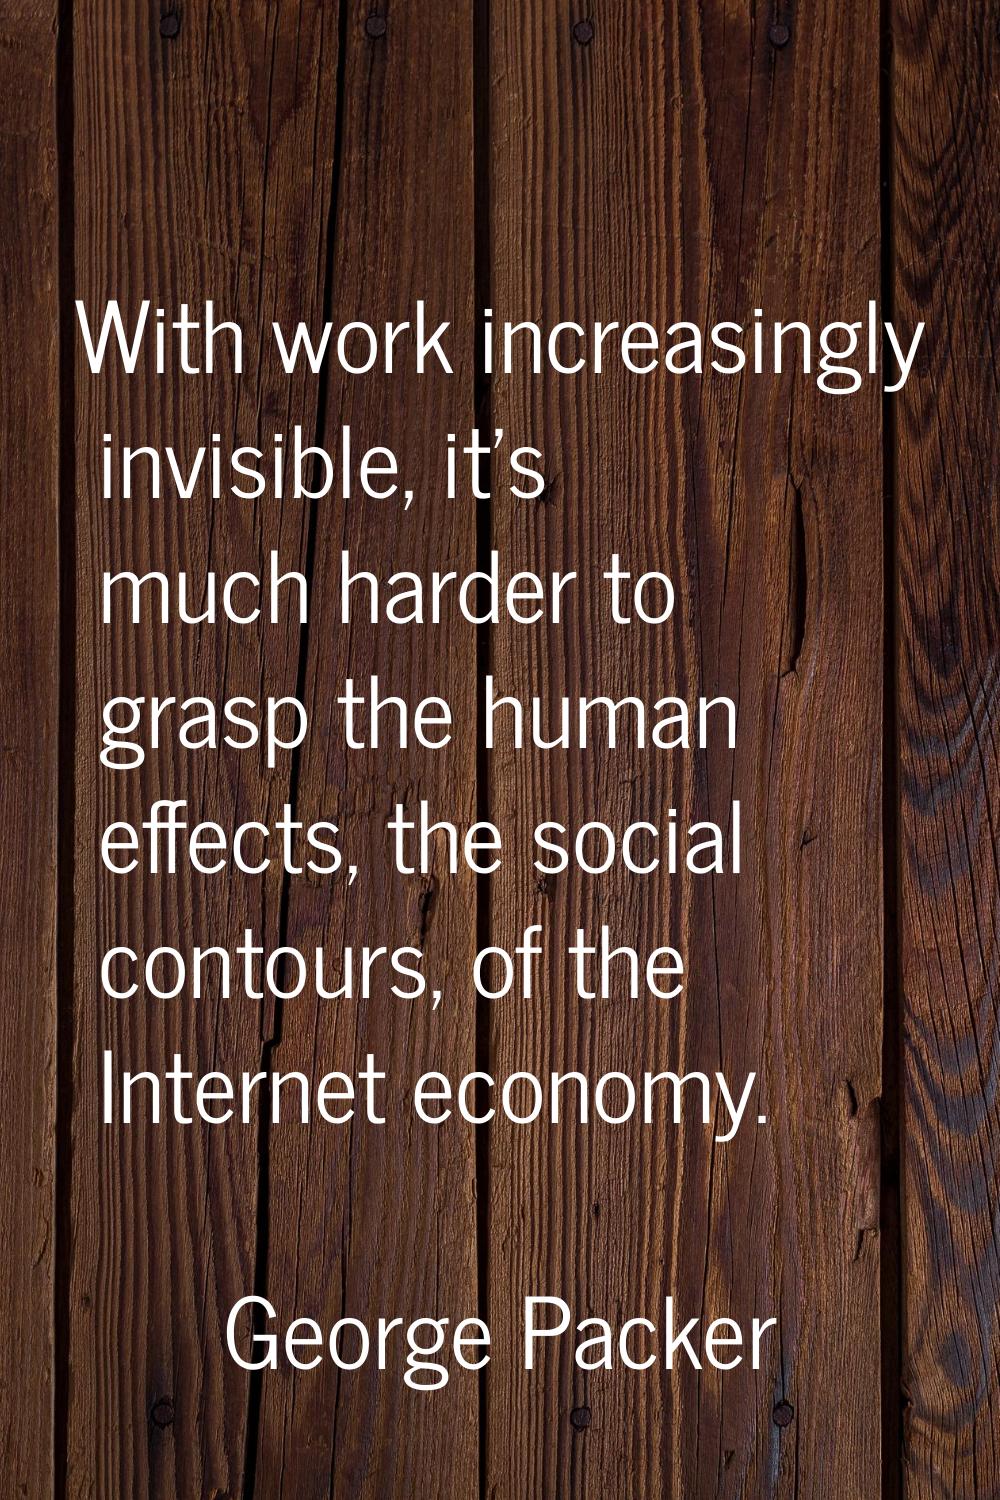 With work increasingly invisible, it's much harder to grasp the human effects, the social contours,